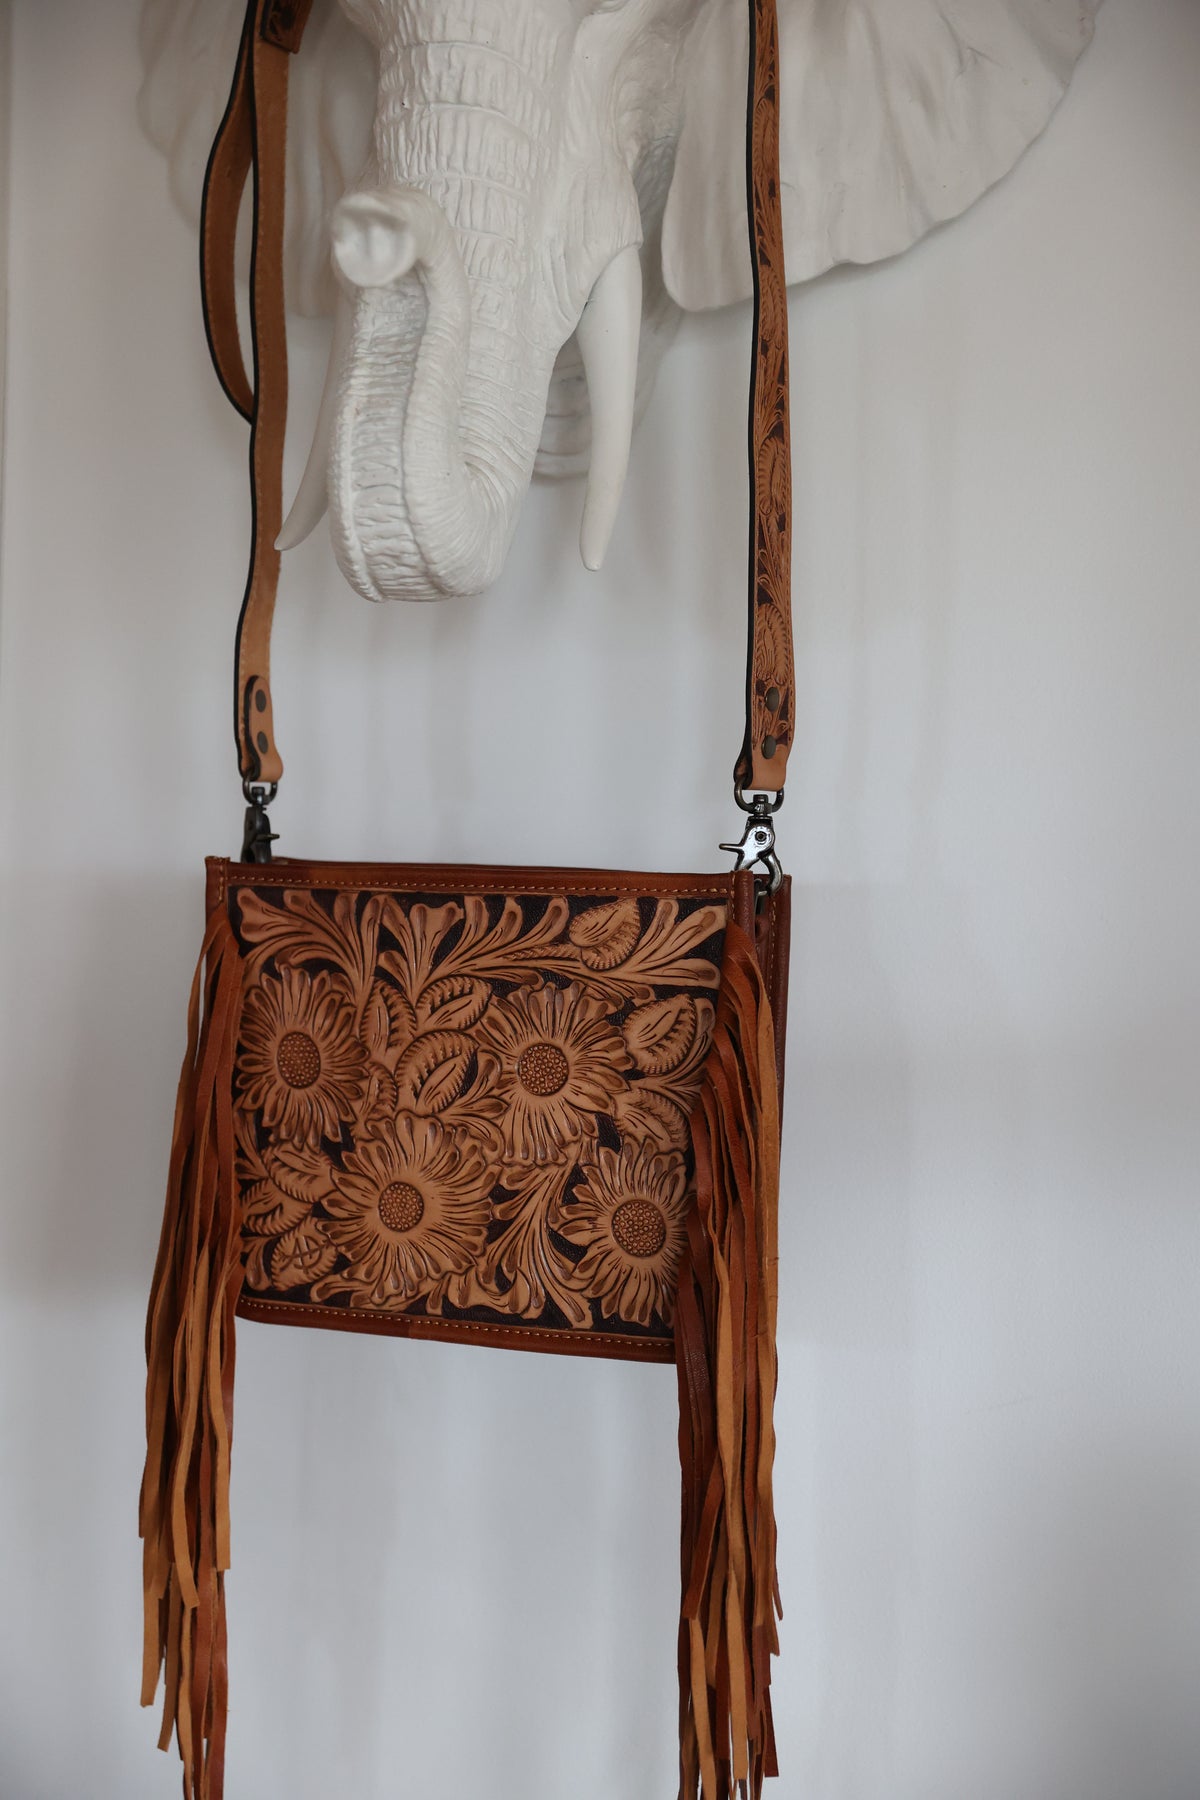 FULLY HAND TOOLED MESSENGER BAG - WITH HAND TOOLED STRAP